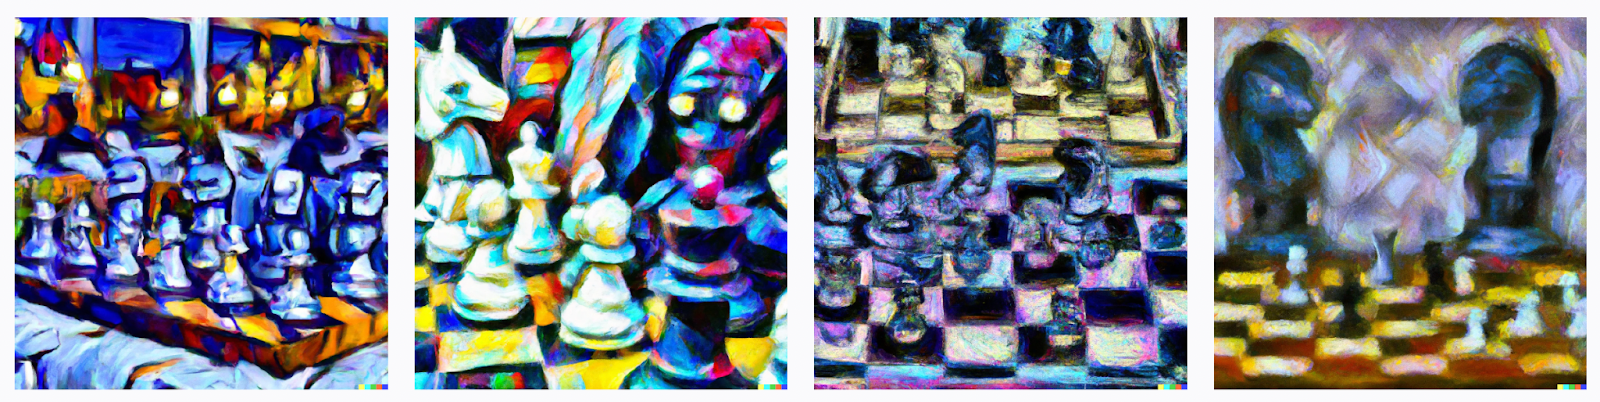 AI Conquered Chess. Is Music Next?